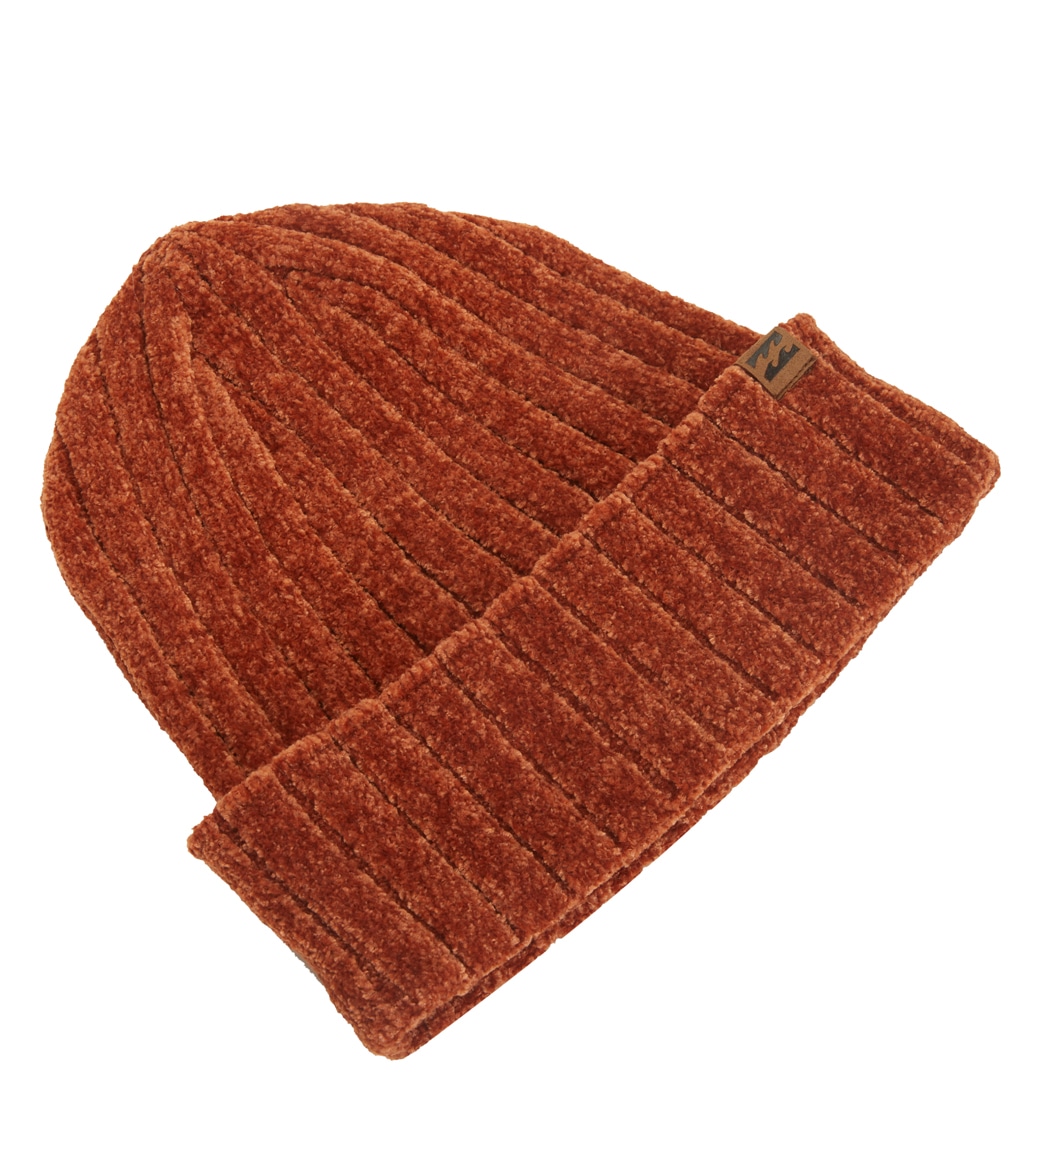 Billabong Warm Up Chenille Beanie - Sweet Chocolate One Size - Swimoutlet.com